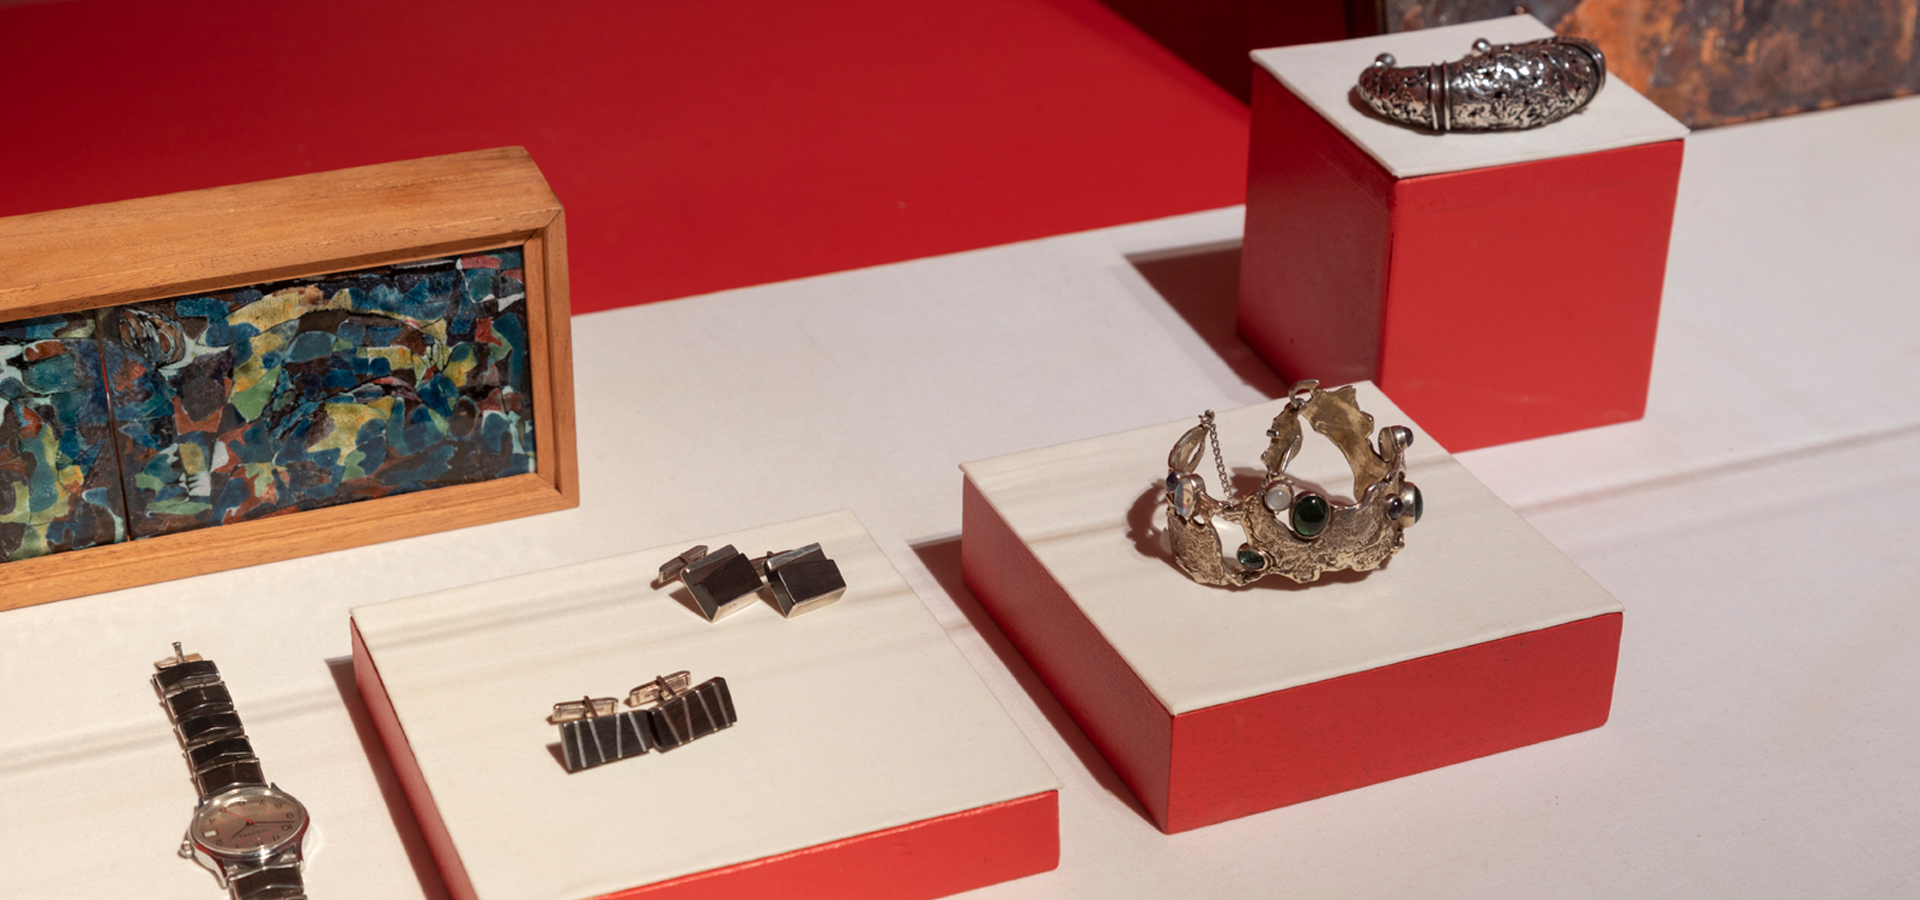 Jewelry on display in gallery with red walls as backdrop